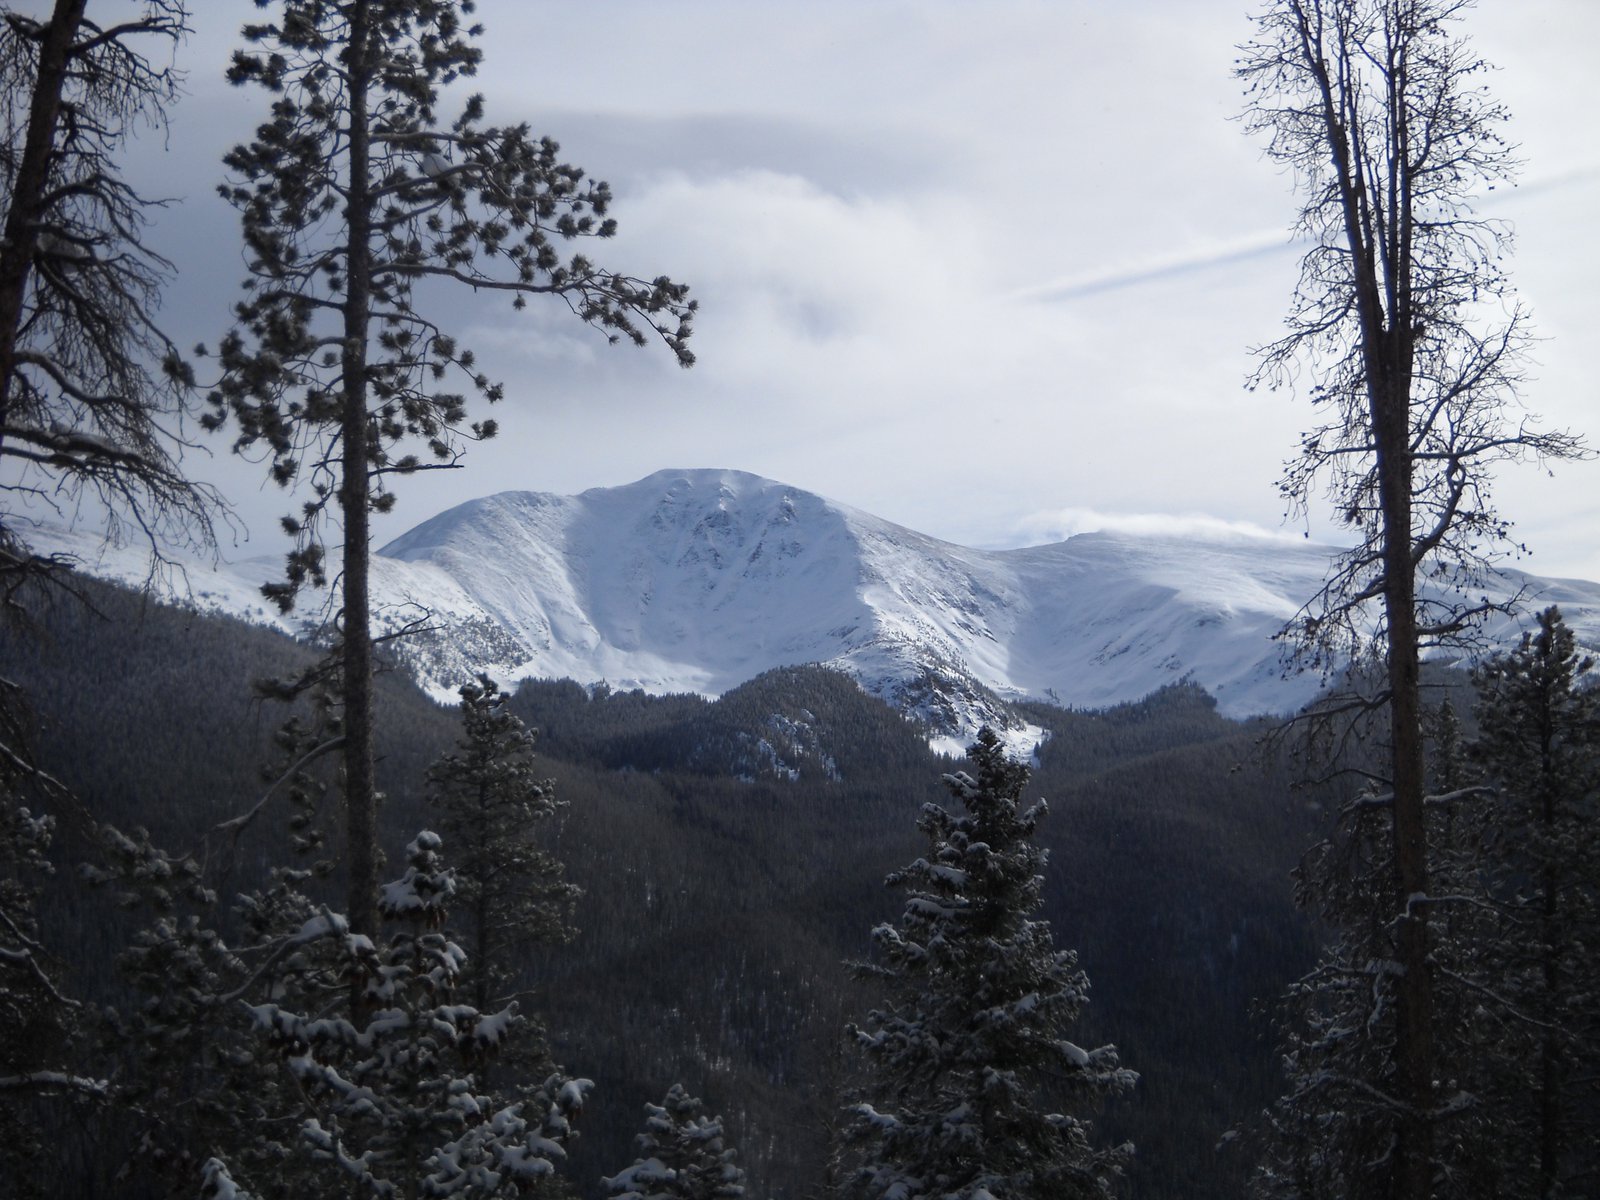 View from winter park